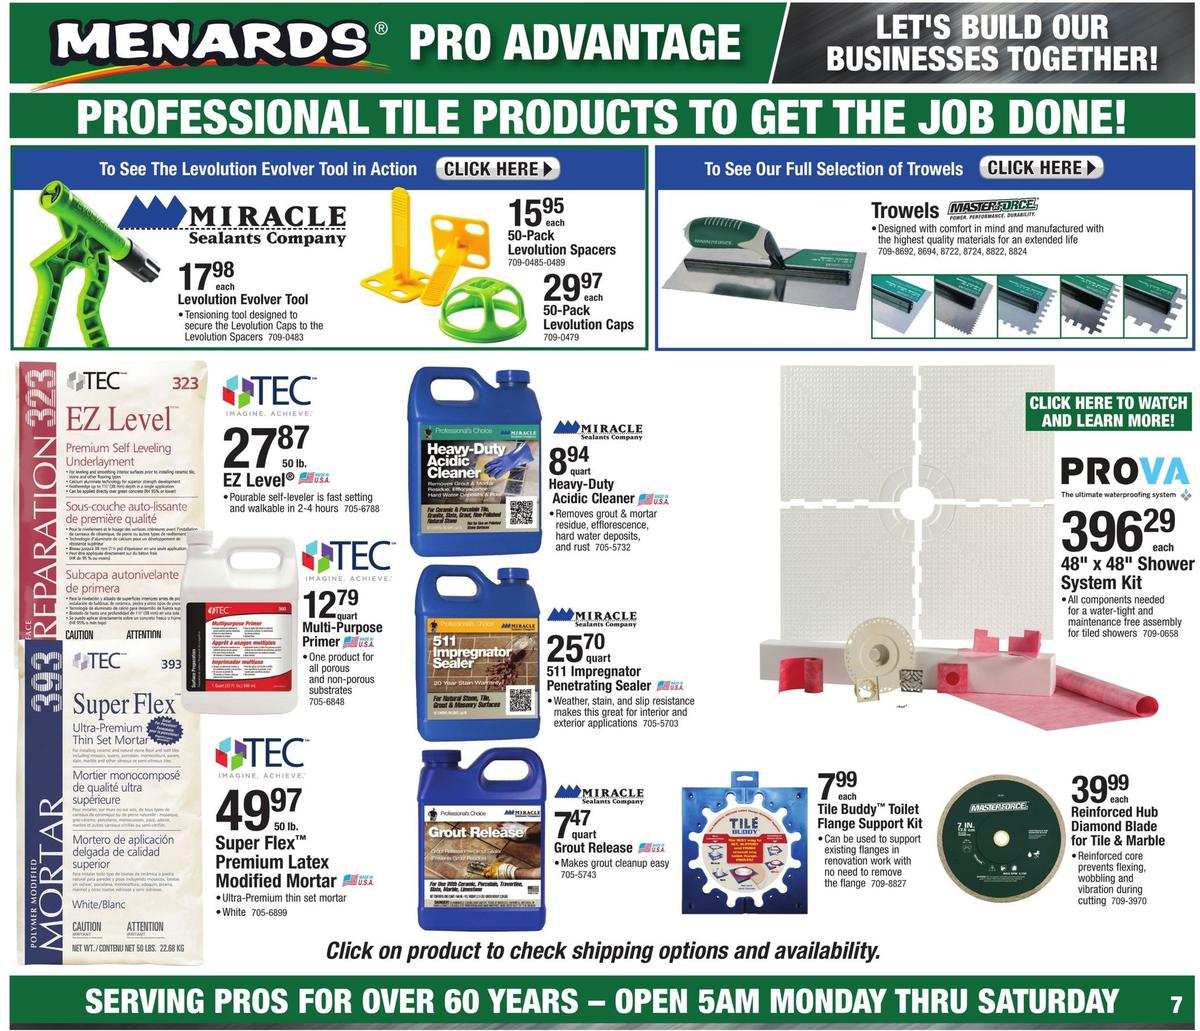 Menards Pro Advantage Weekly Ad from September 8